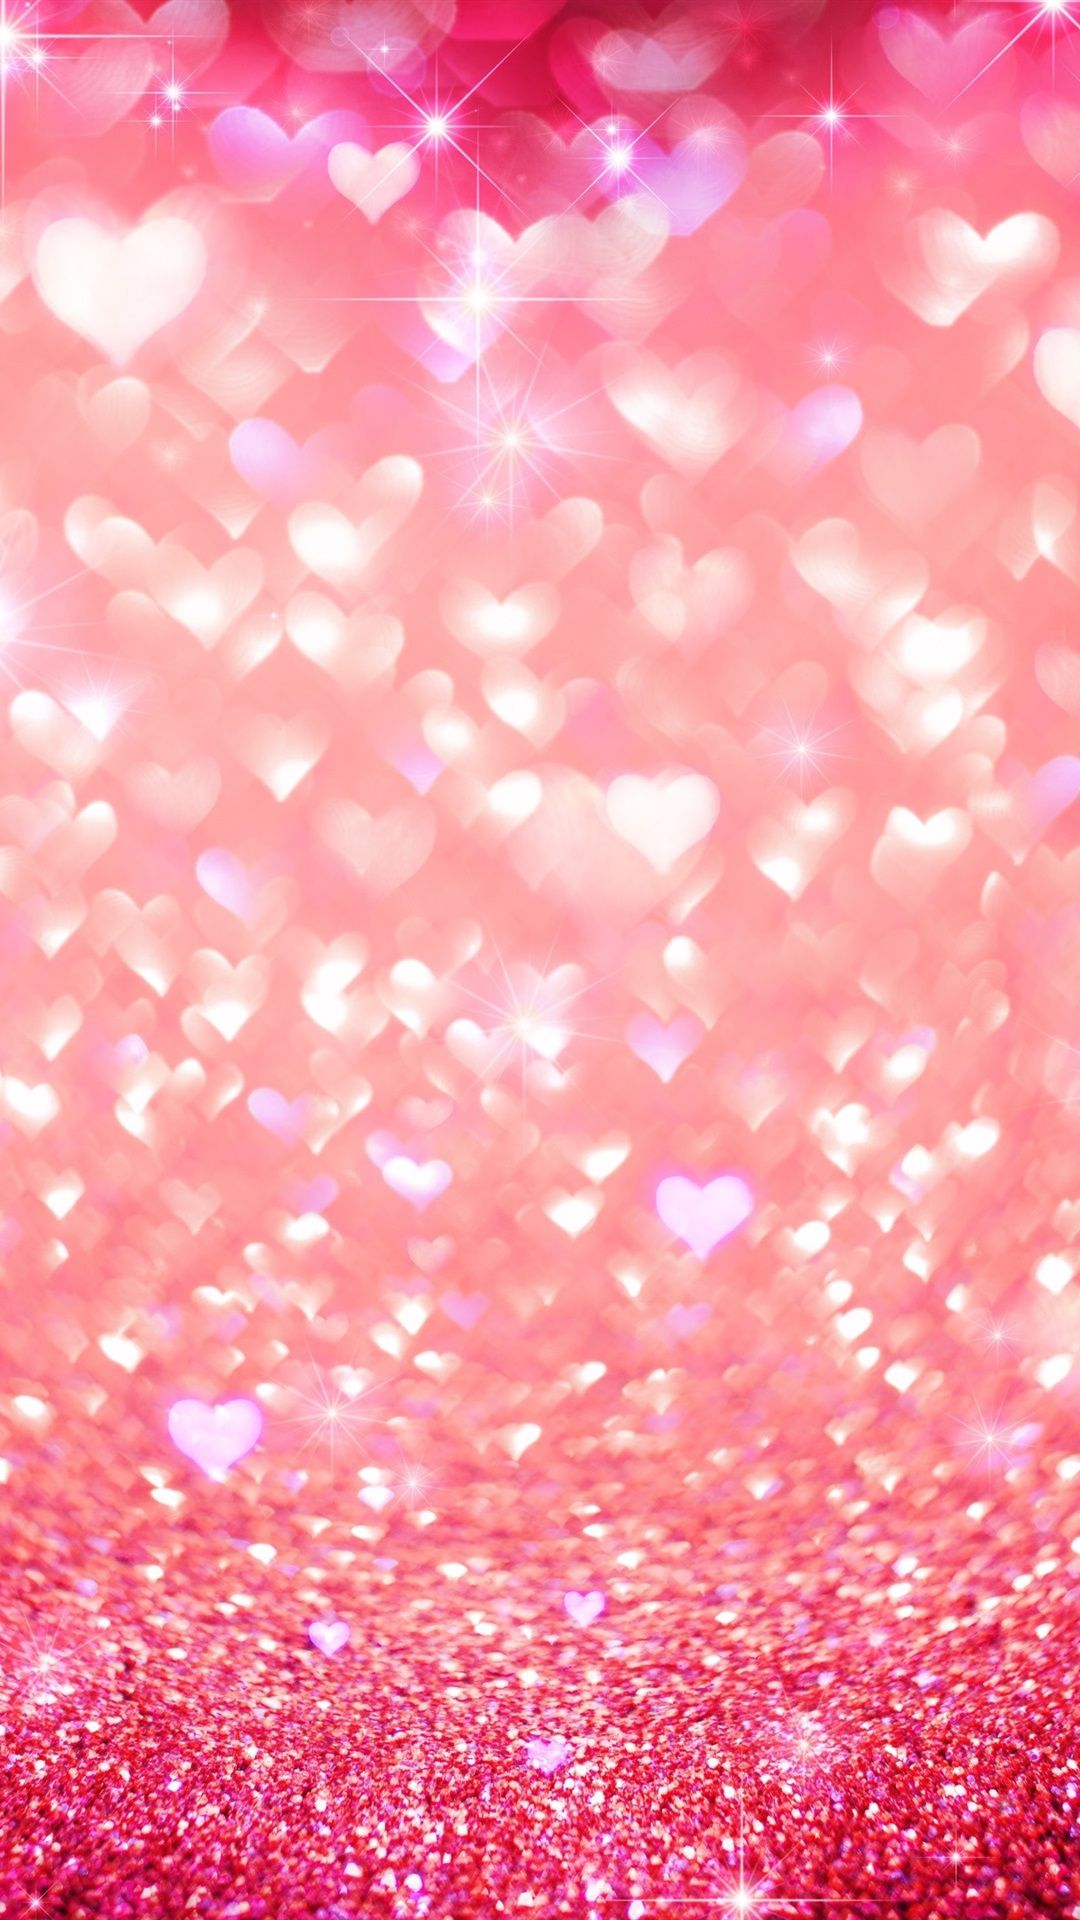 Pink Love Heart, Shine, Glitter 1080x1920 IPhone 8 7 6 6S Plus Wallpaper, Background, Picture, Image